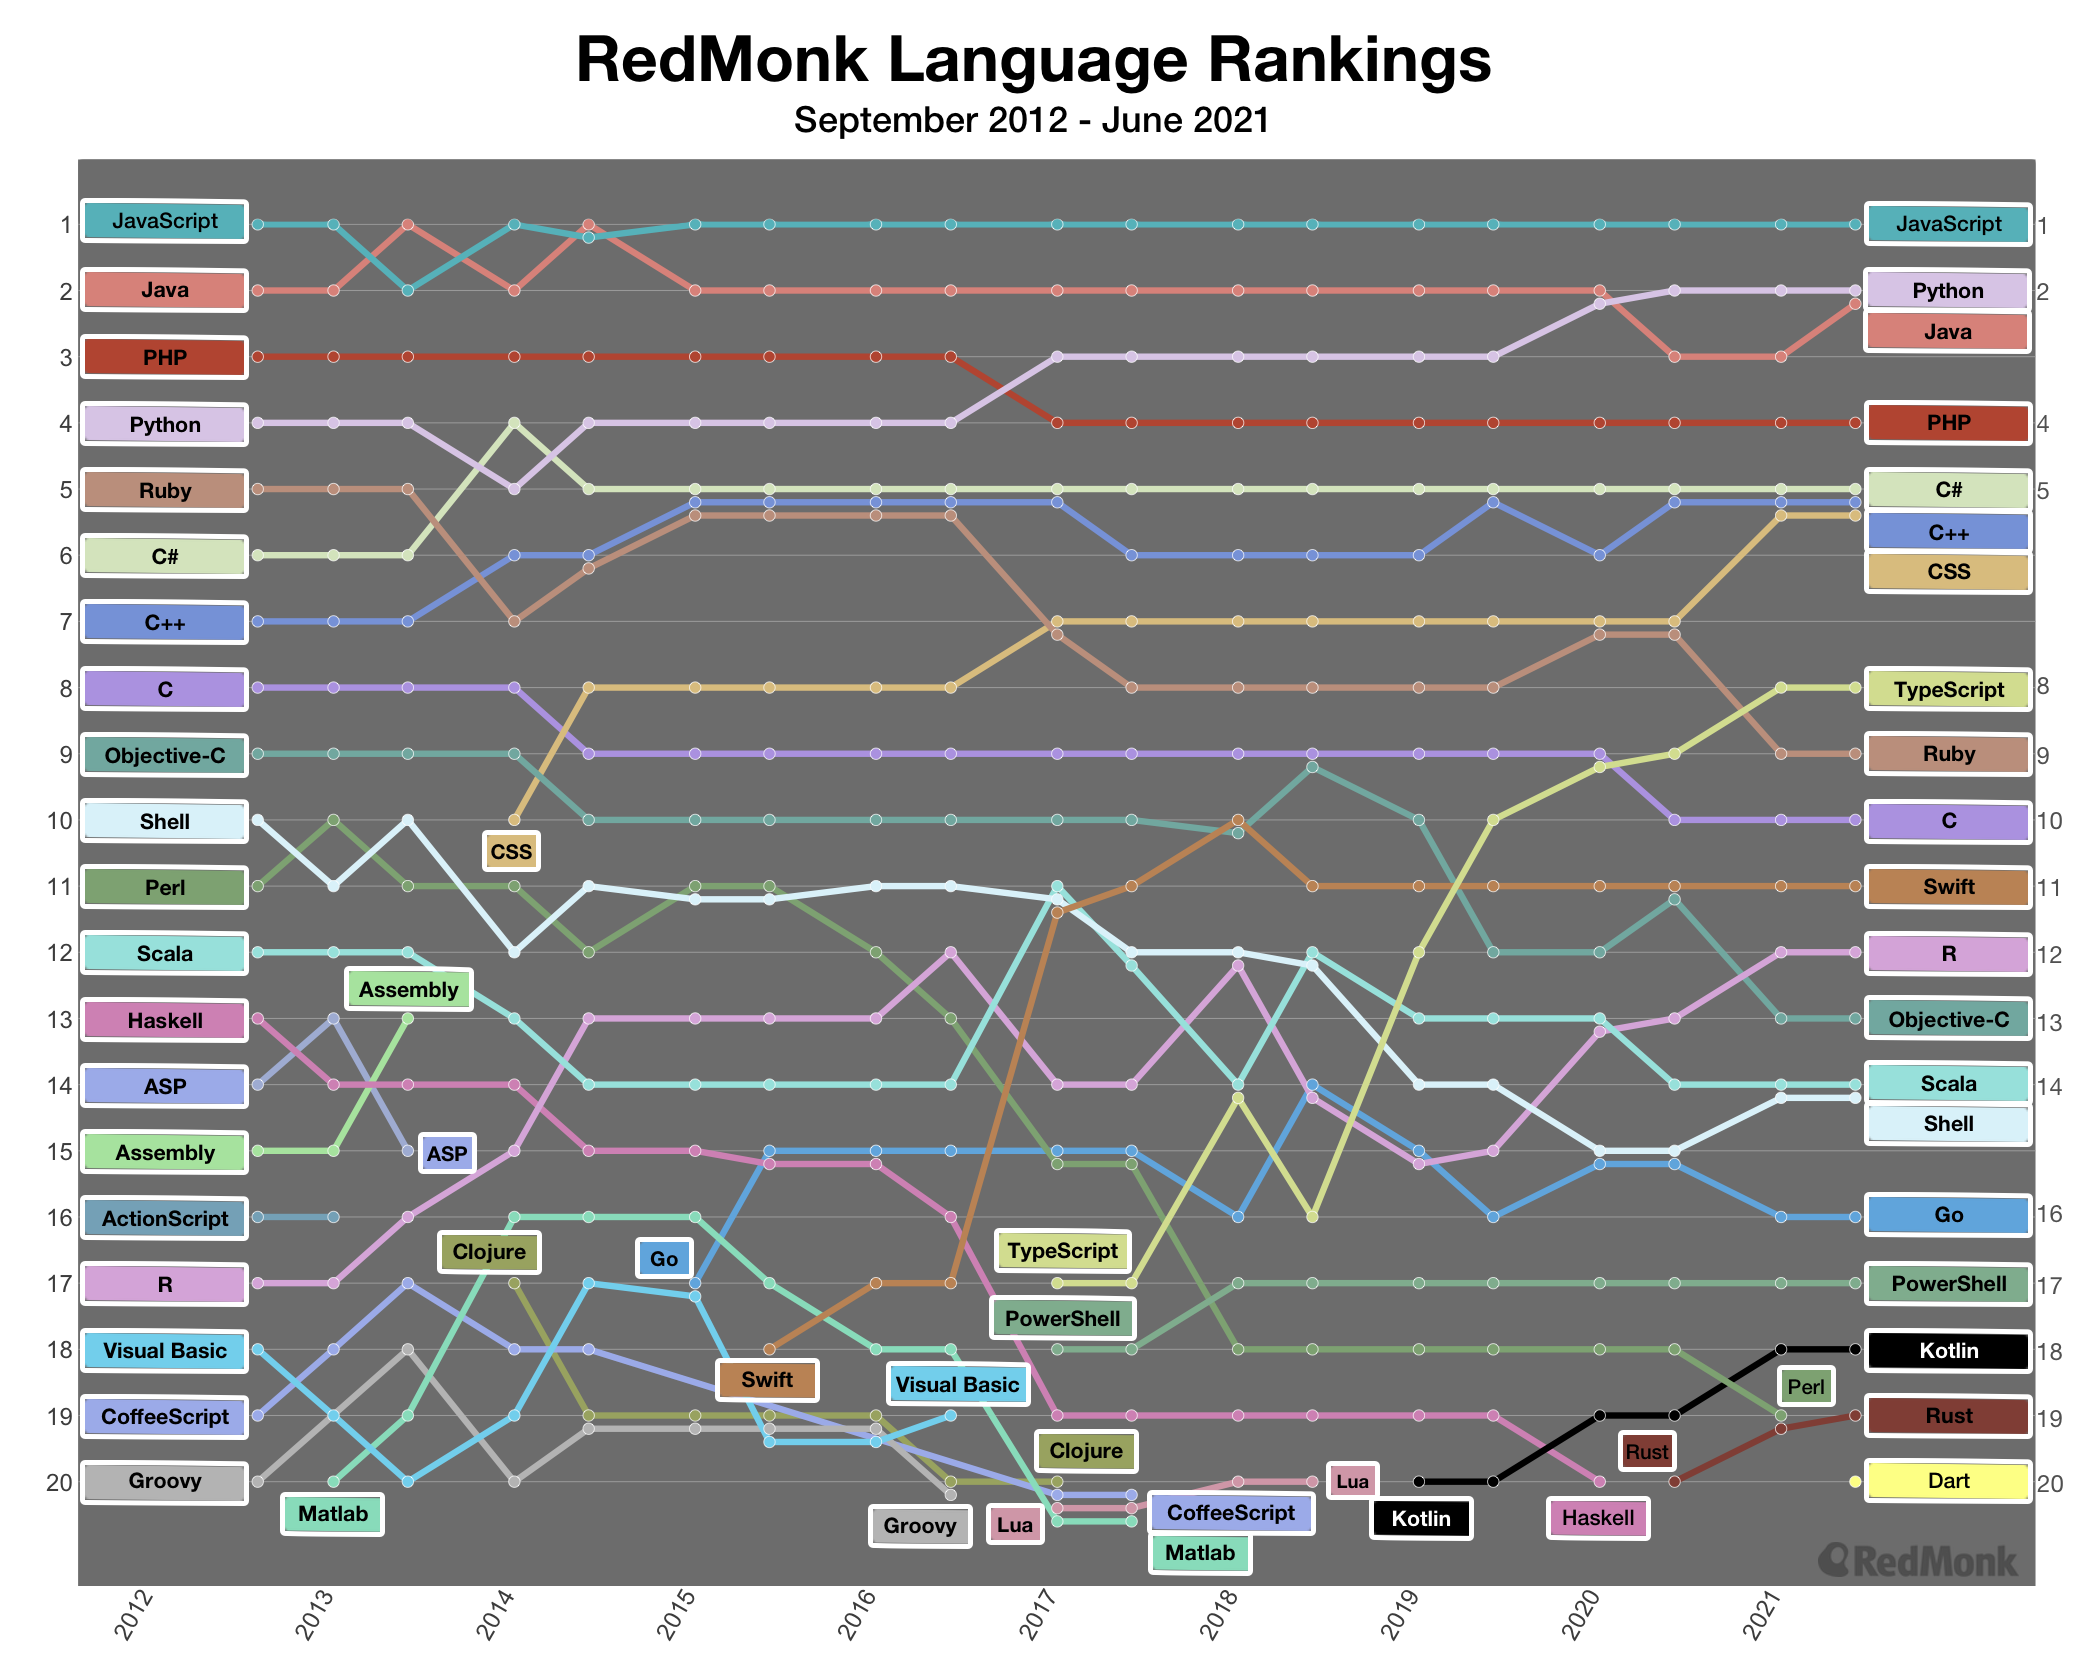 Top 20 languages over time. X-axis shows time ranging from 2012 to 2021. y-axis shows ranks 1-20. languages are plotted by rank for each semi-annual iteration of the rankings.